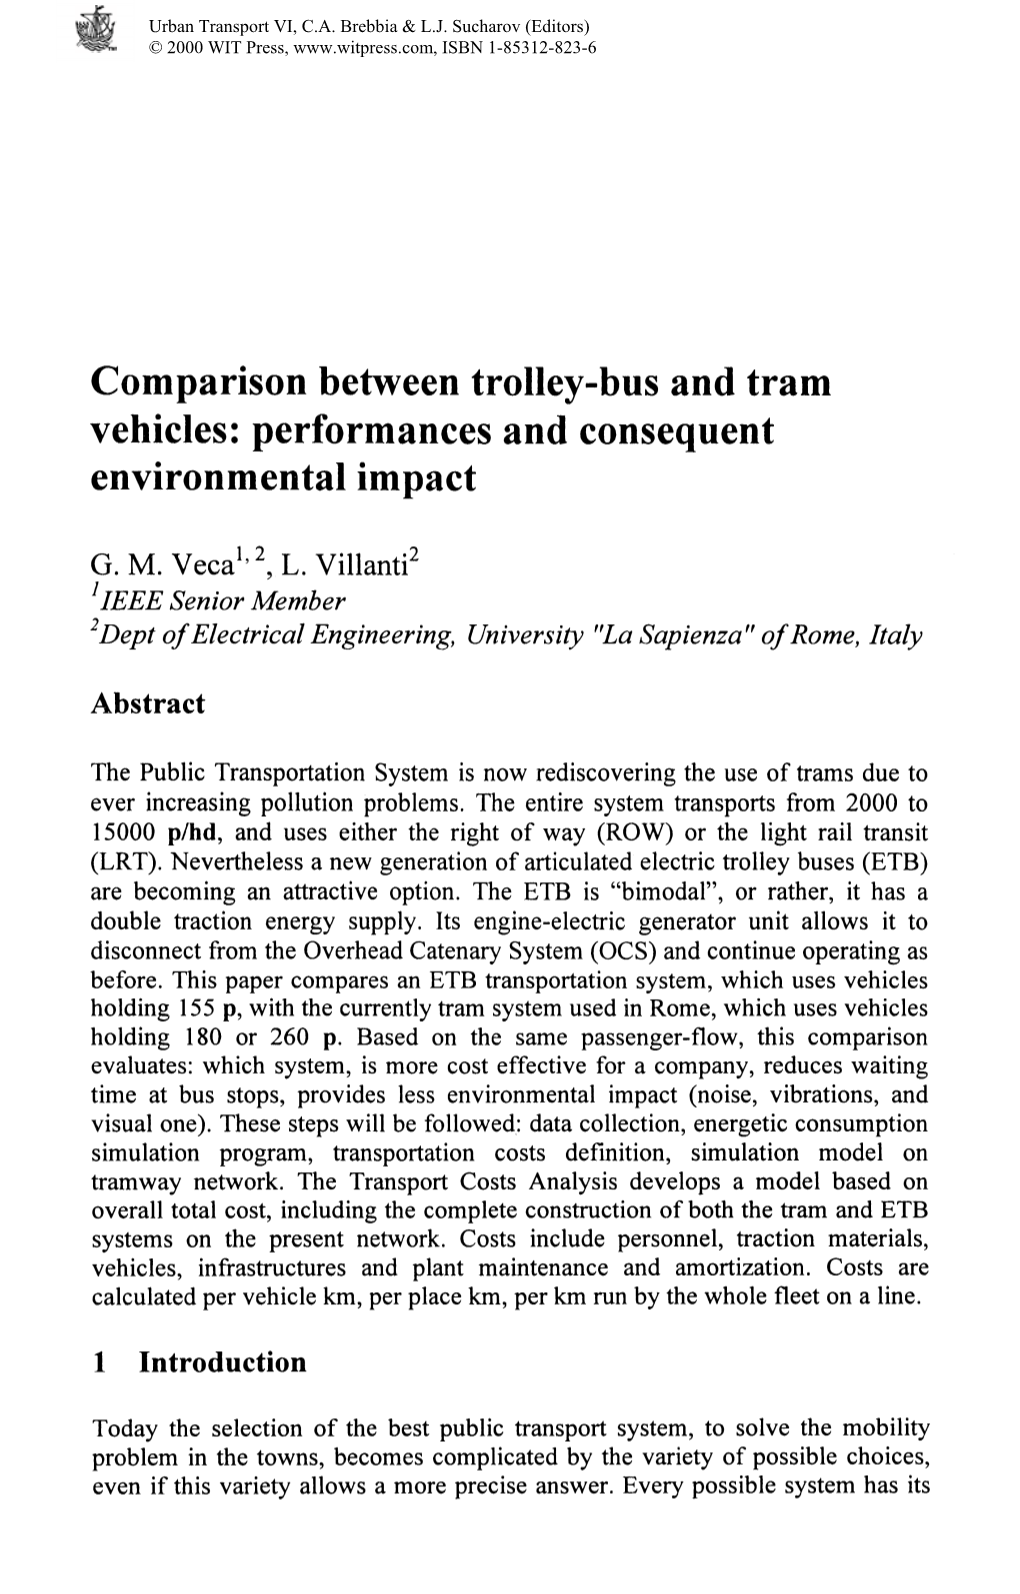 Comparison Between Trolley-Bus and Tram Vehicles: Performances and Consequent Environmental Impact G. M. Veca^ L. Villanti* IEEE